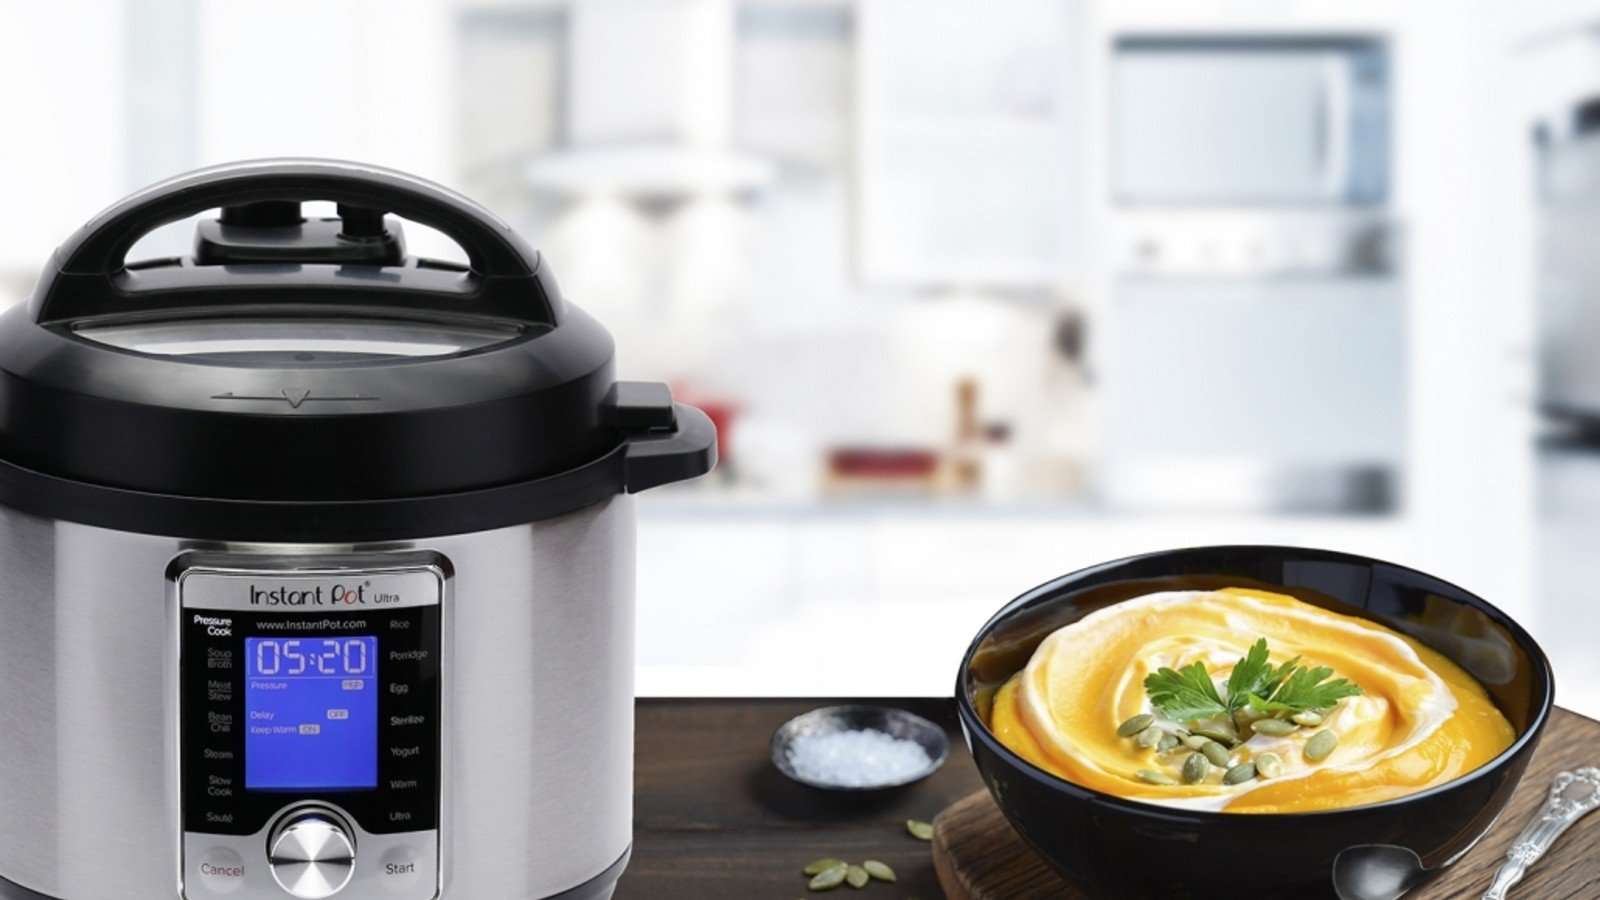 Can you use your Instant Pot as a steamer?